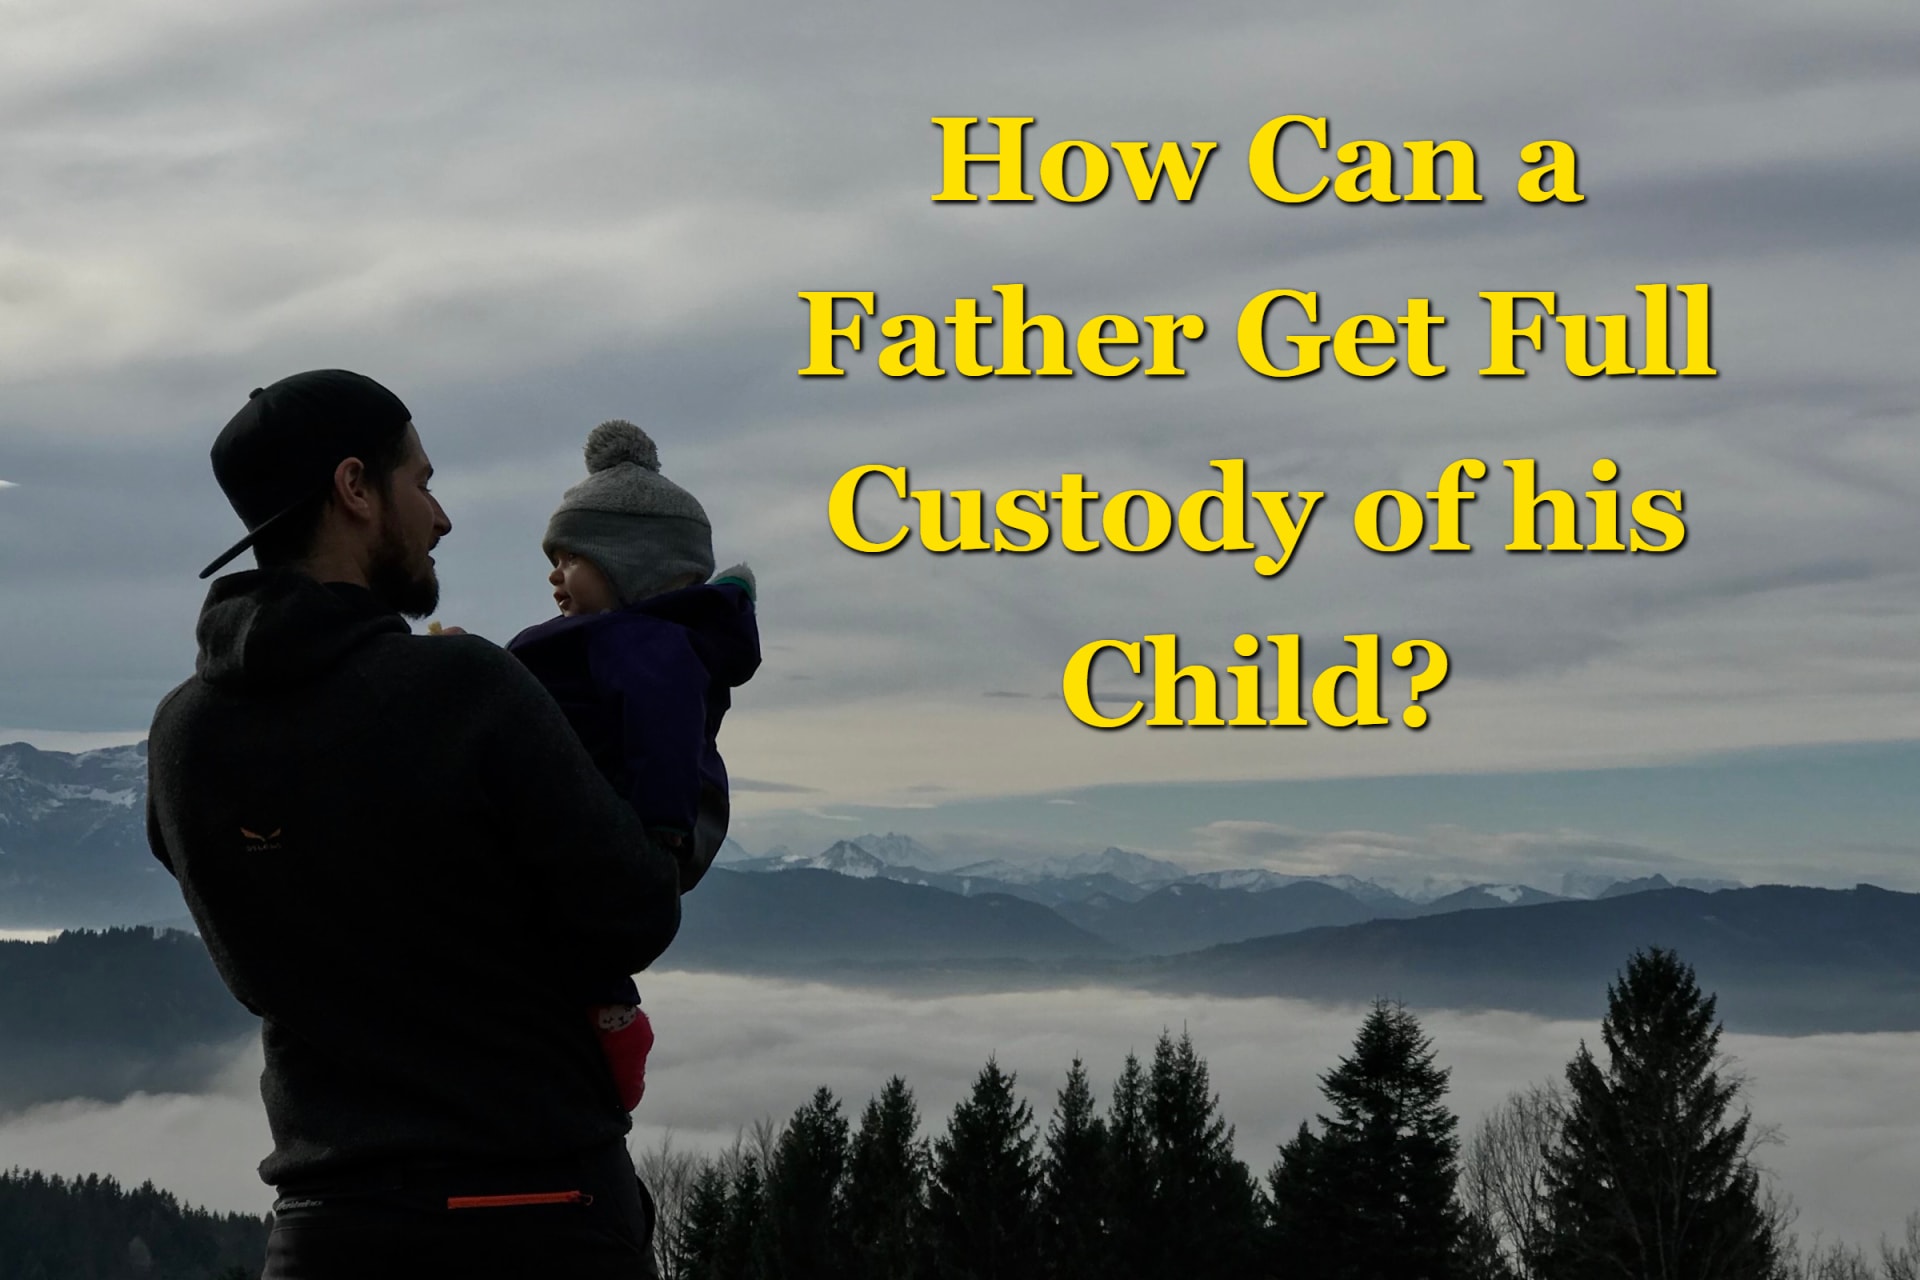 How Can a Father Get Full Custody of his Child?